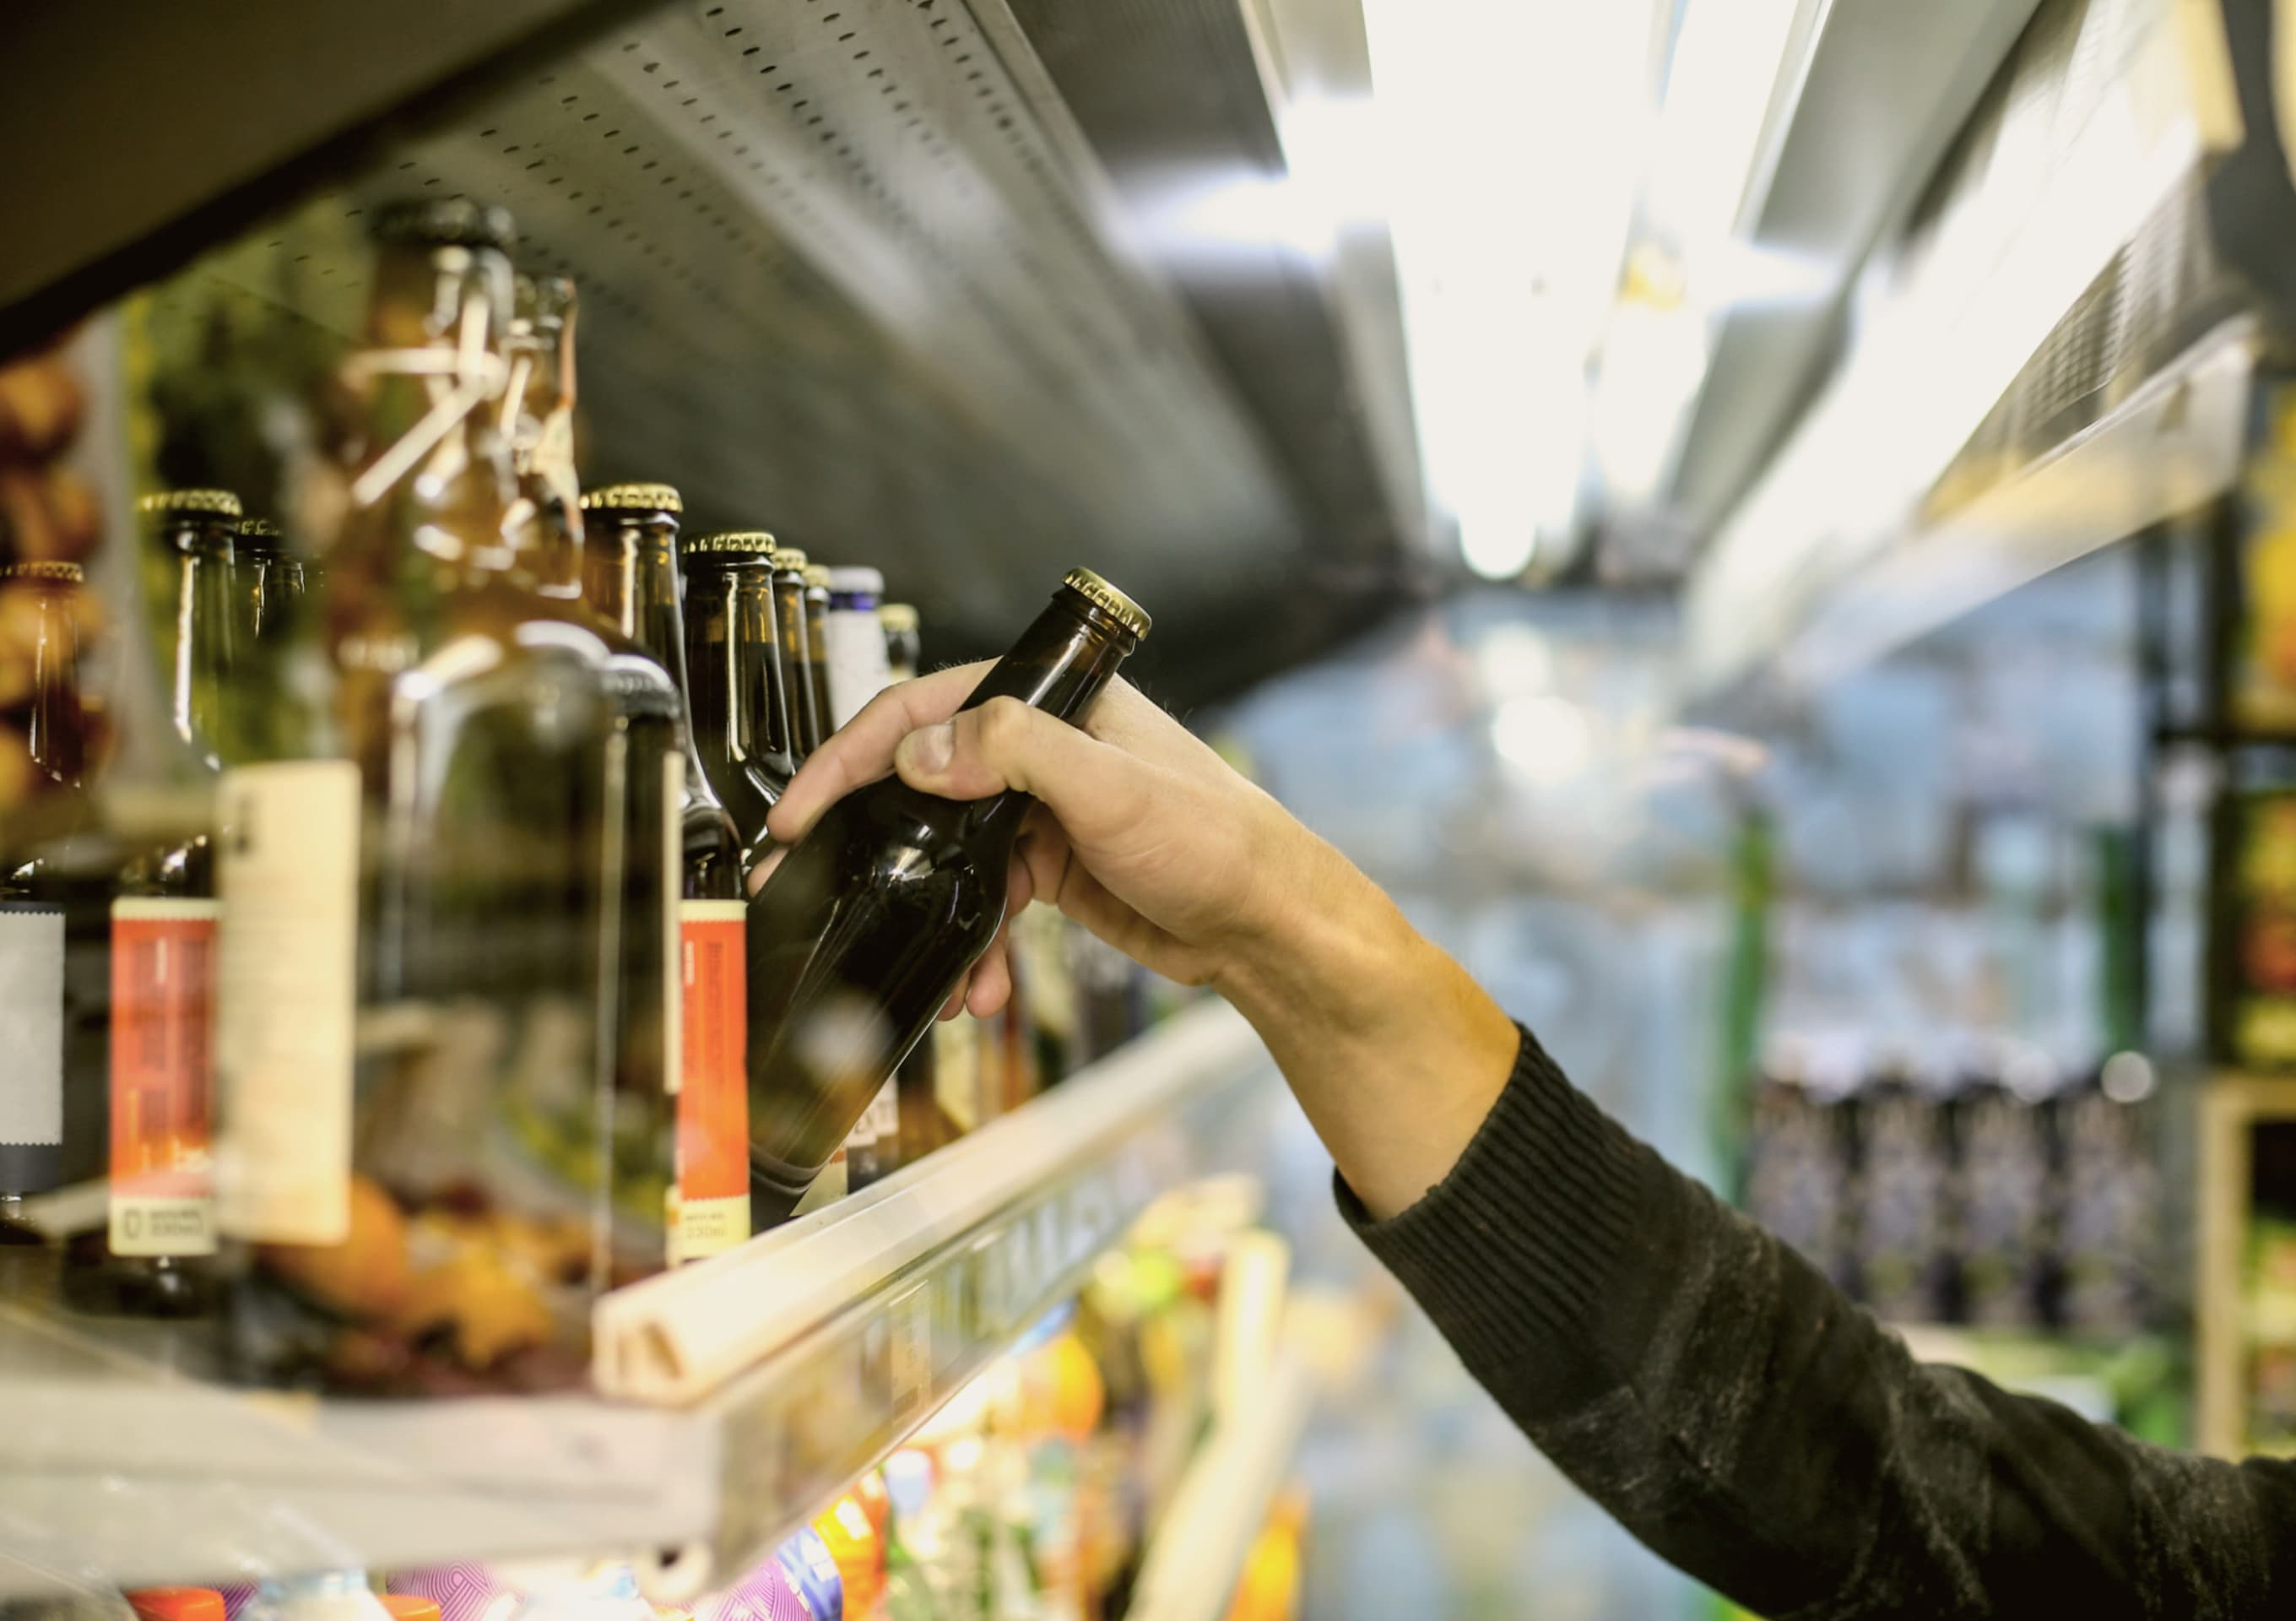 Bye-bye booze: Beer set to disappear from shelves, warn trade association